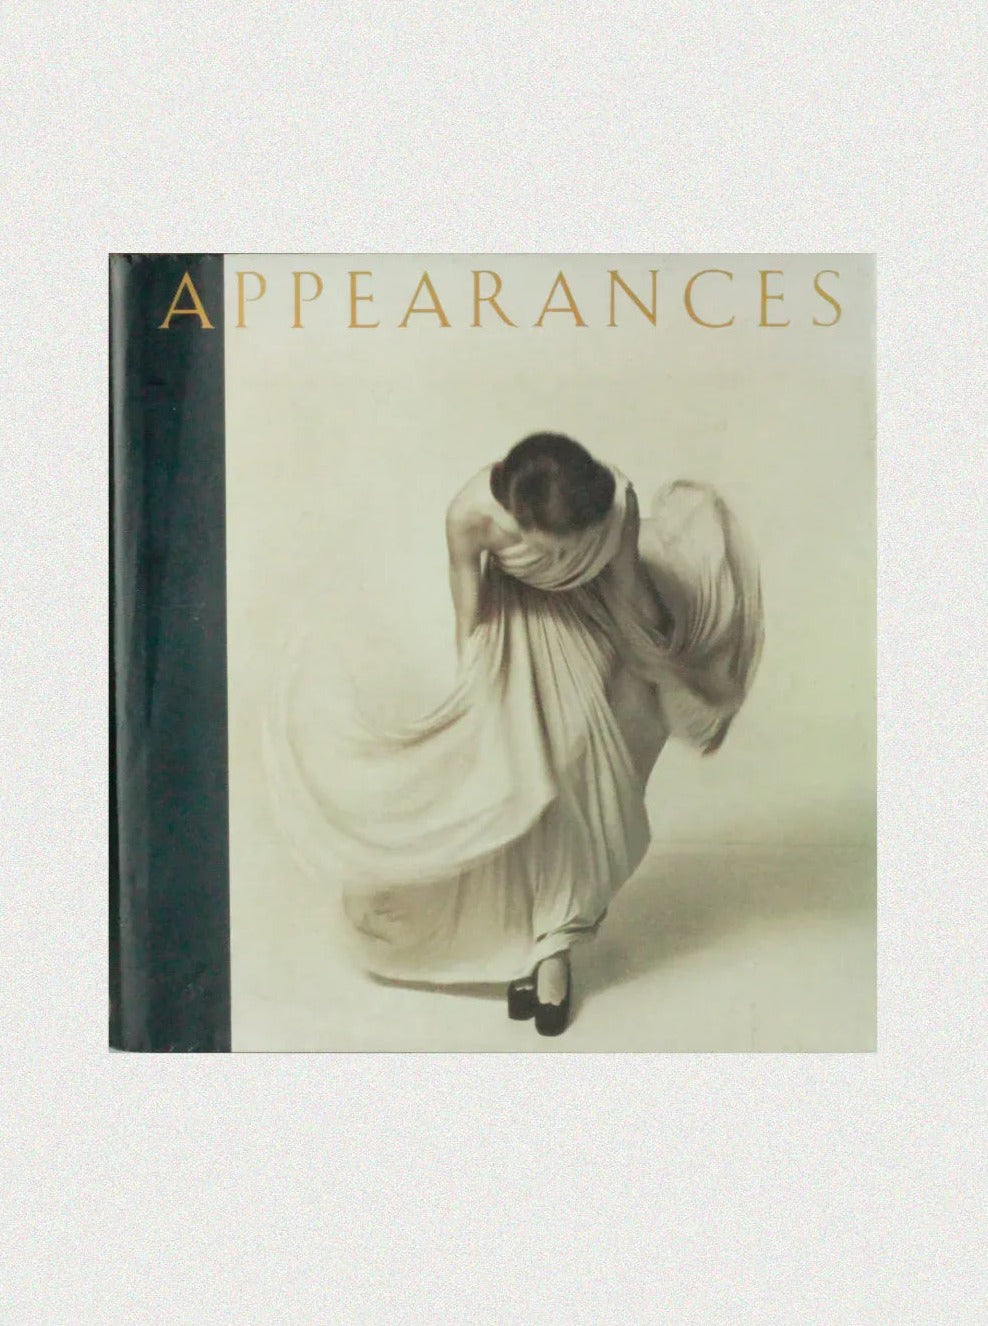 Book cover titled "Appearances" featuring a sepia-toned image of a person gracefully bending forward while wearing a flowing, draped dress. This stunning libro de fotografía de moda by Boga Avante Shop showcases the work of fotógrafos famosos and will be exhibited at the renowned Victoria & Albert Museum.